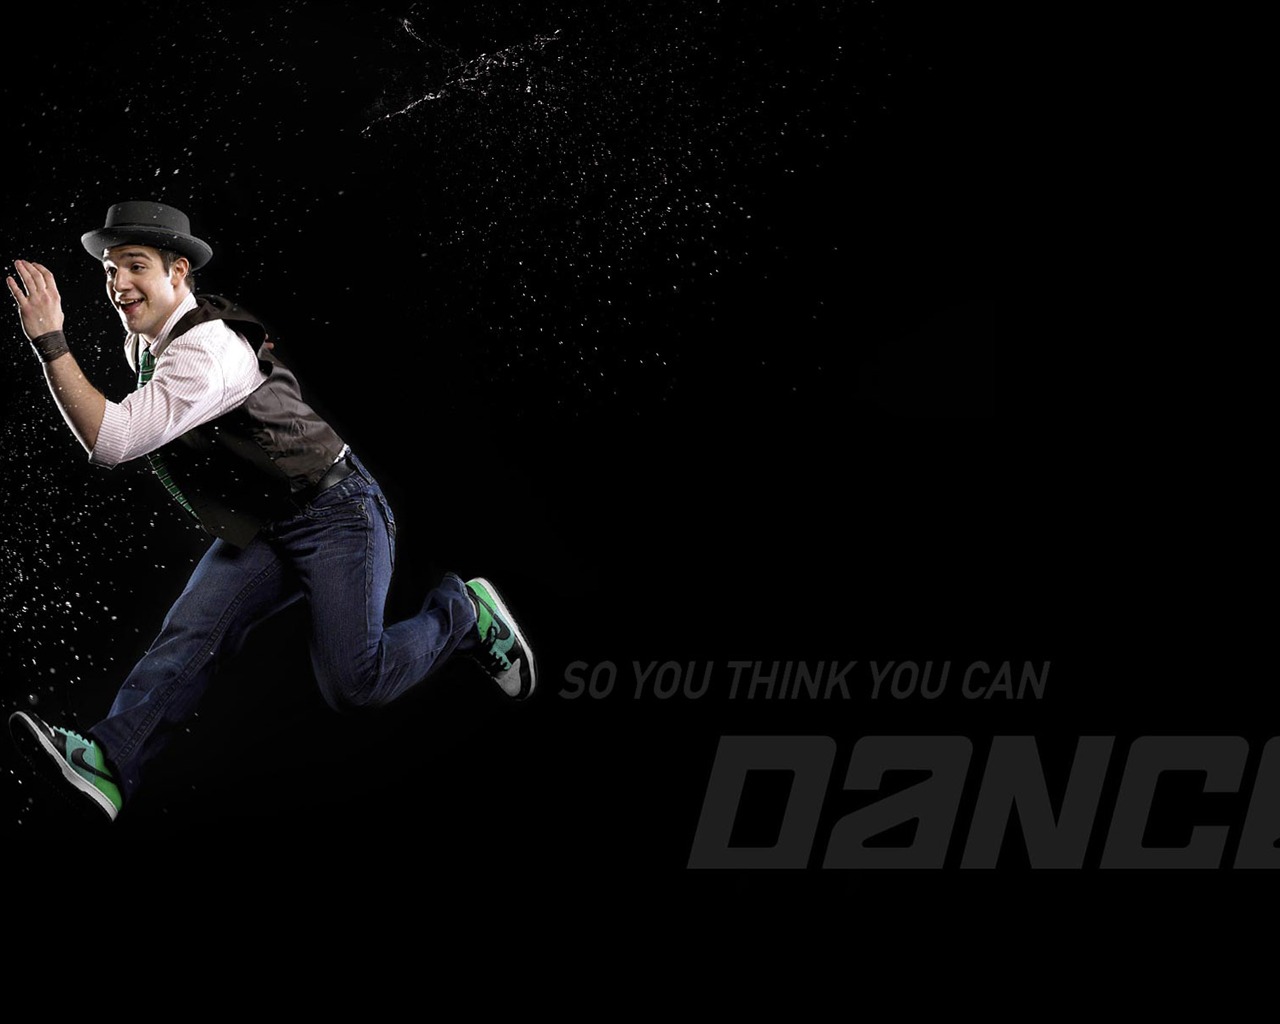 So You Think You Can Dance wallpaper (1) #14 - 1280x1024